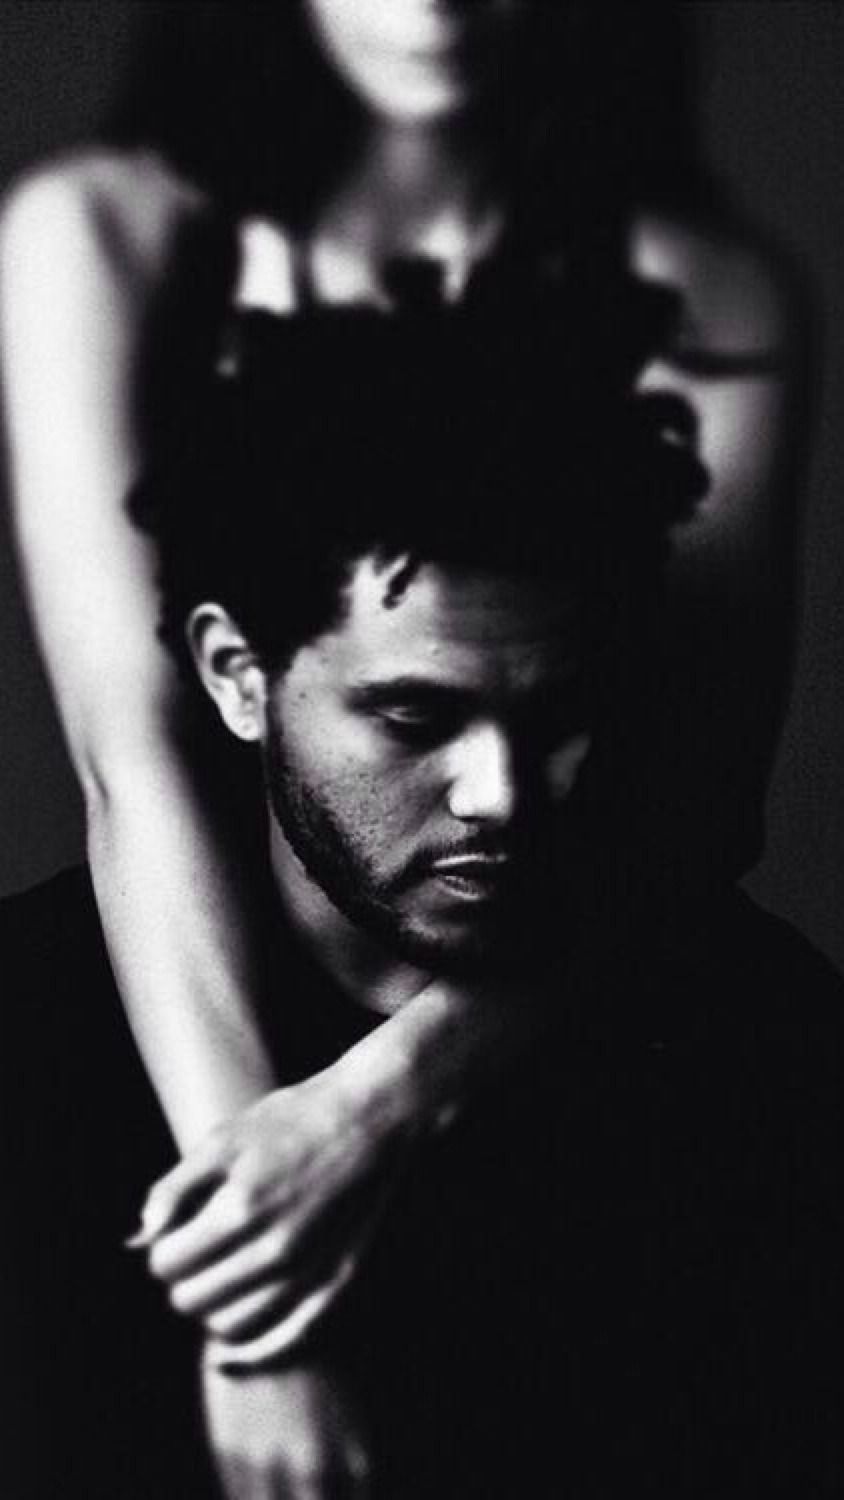 iphone 5 wallpaper the weeknd. The weeknd trilogy